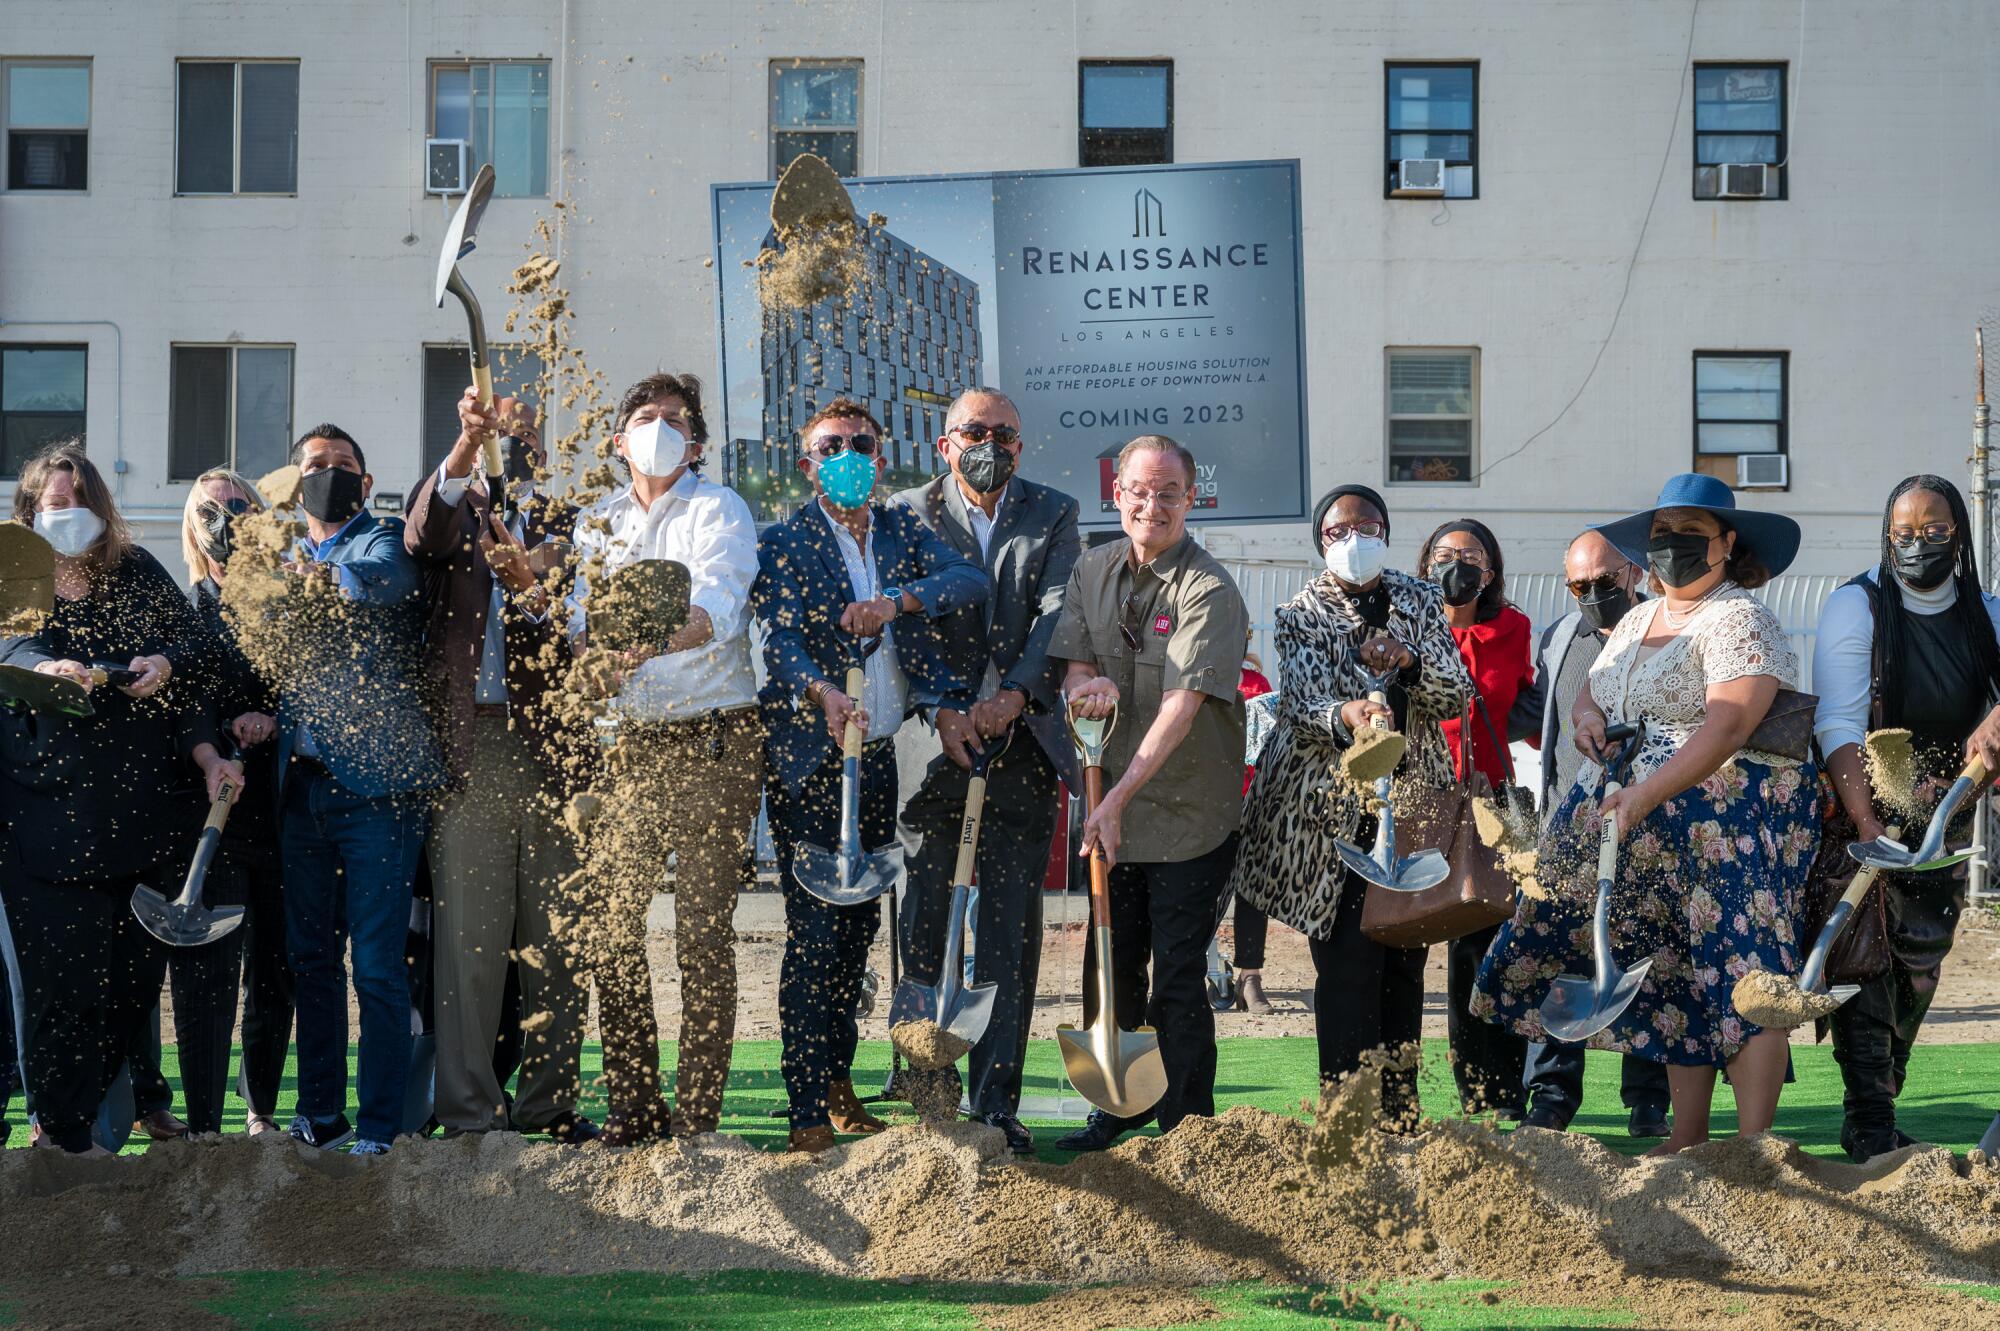 A line of people dig up and throw dirt in the air during an outdoor groundbreaking ceremony.